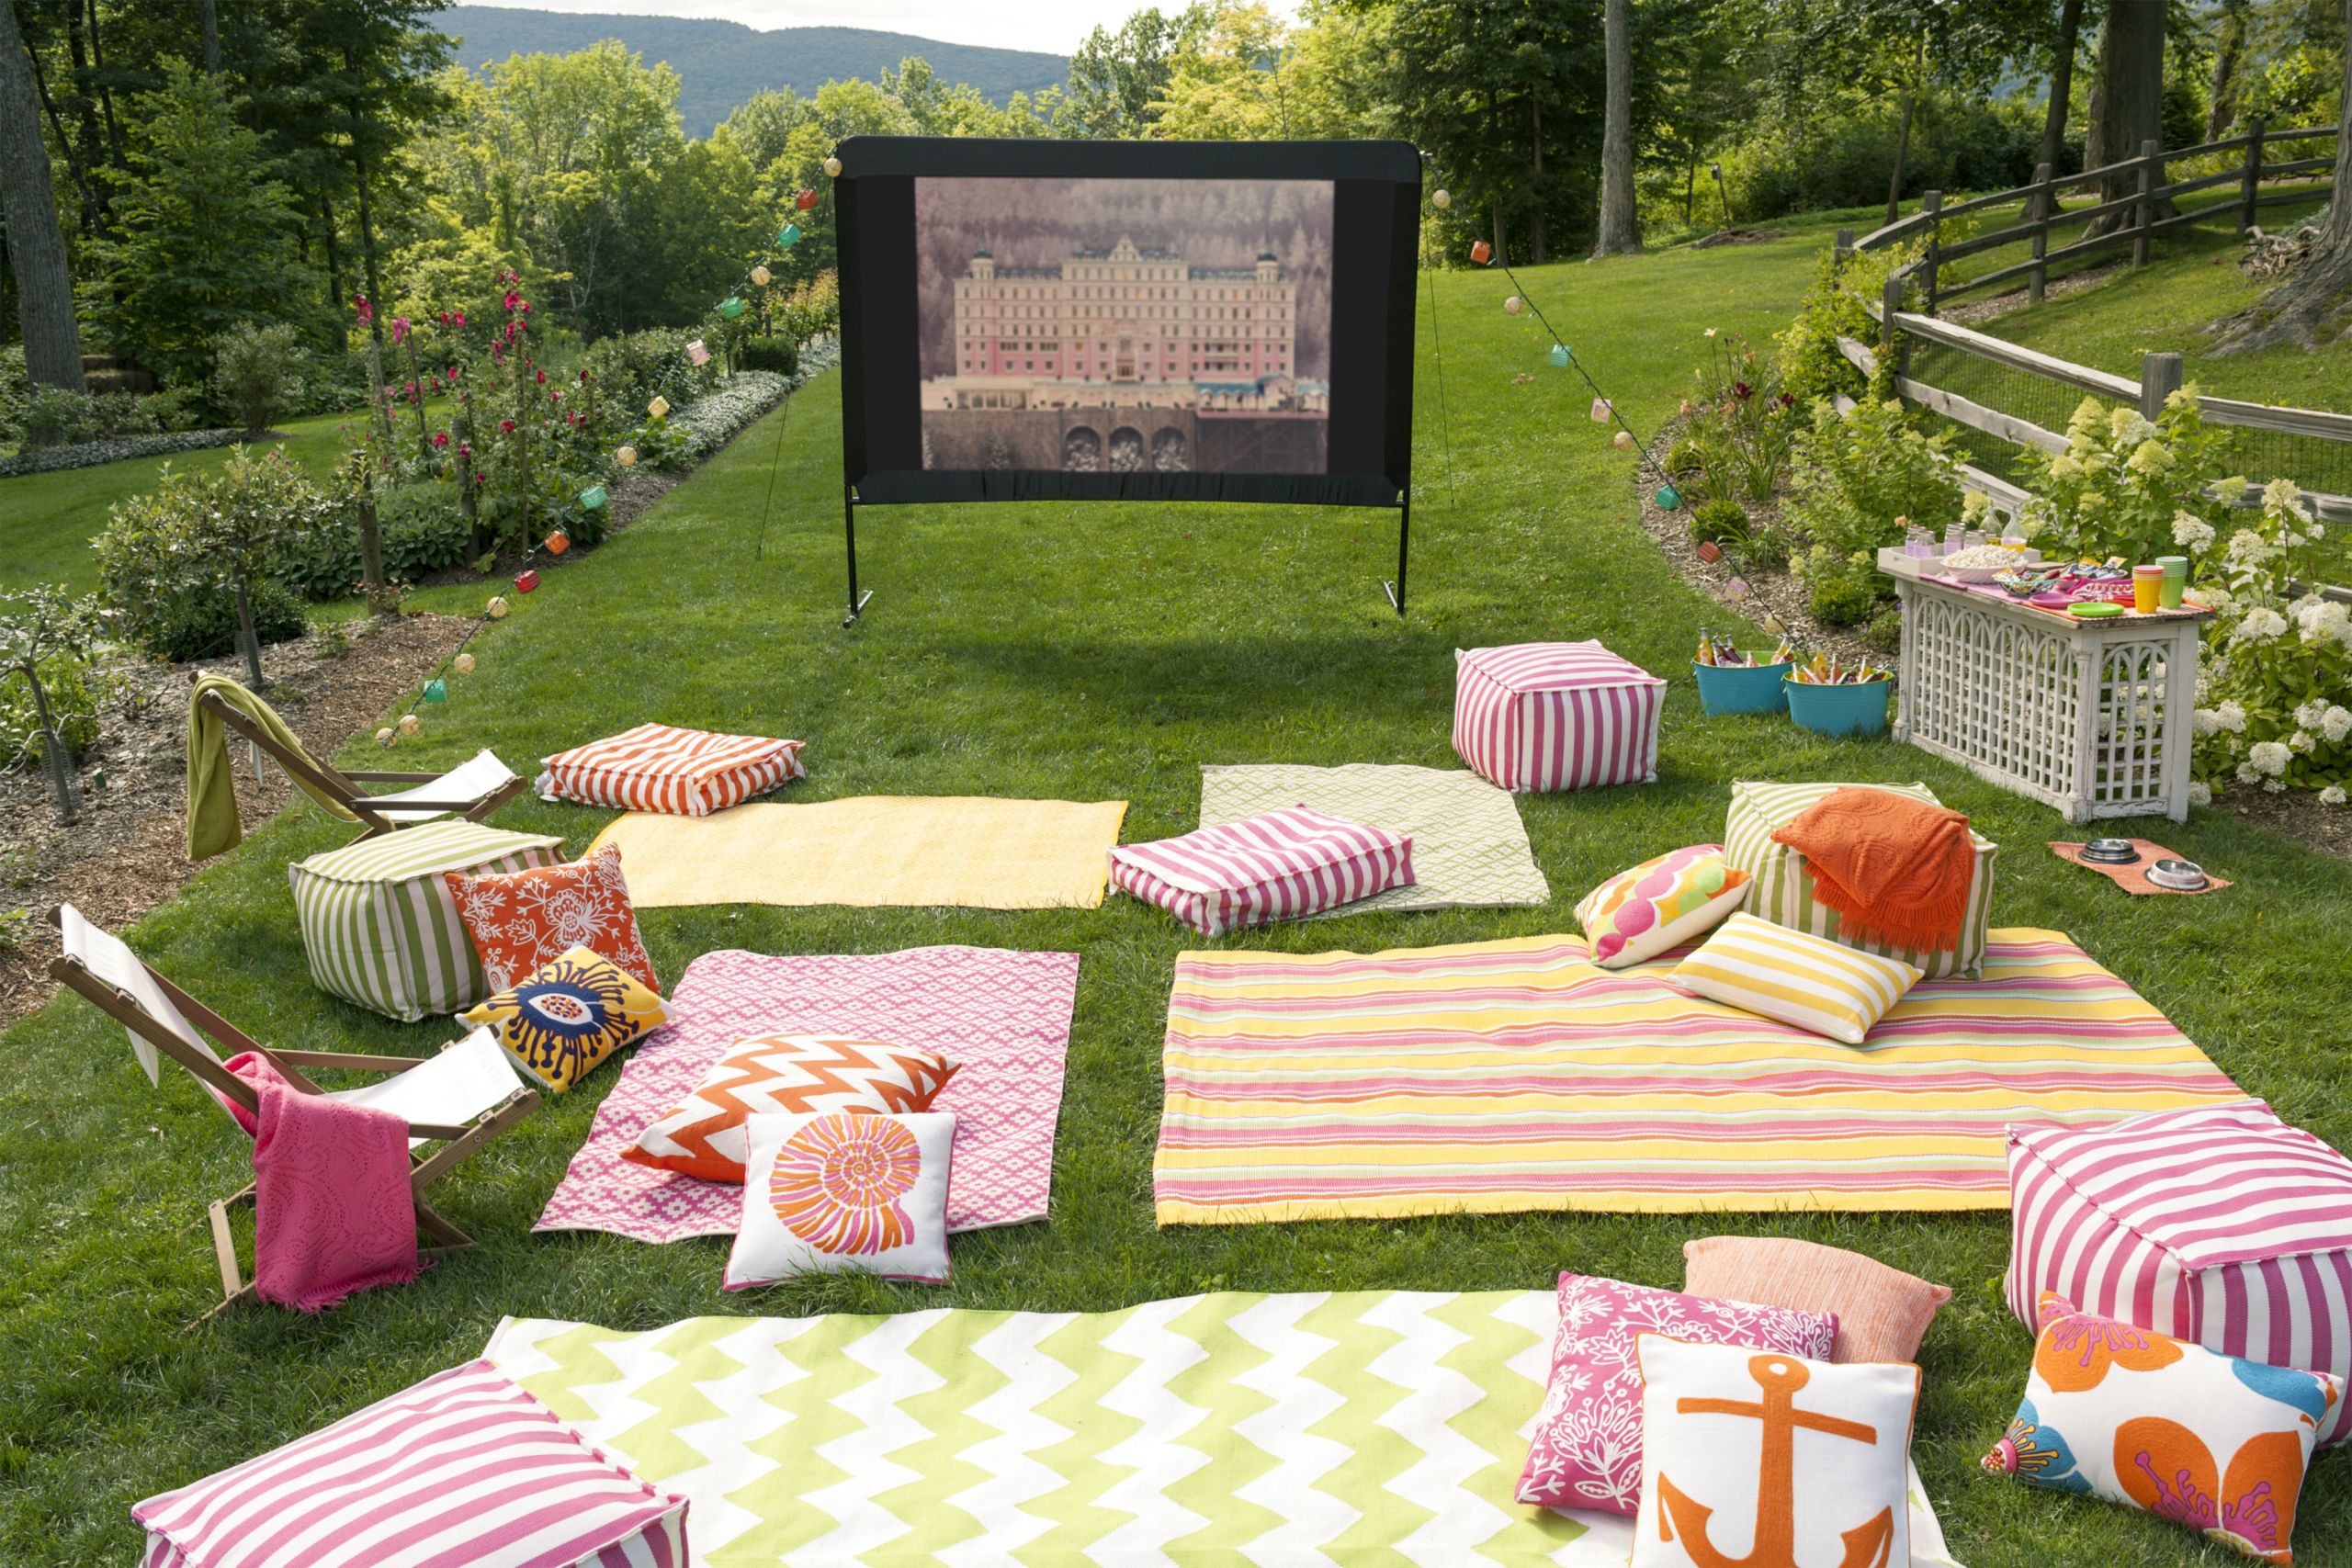 Backyard Movie Night Party Ideas
 10 Tips for Hosting an Outdoor Movie Night